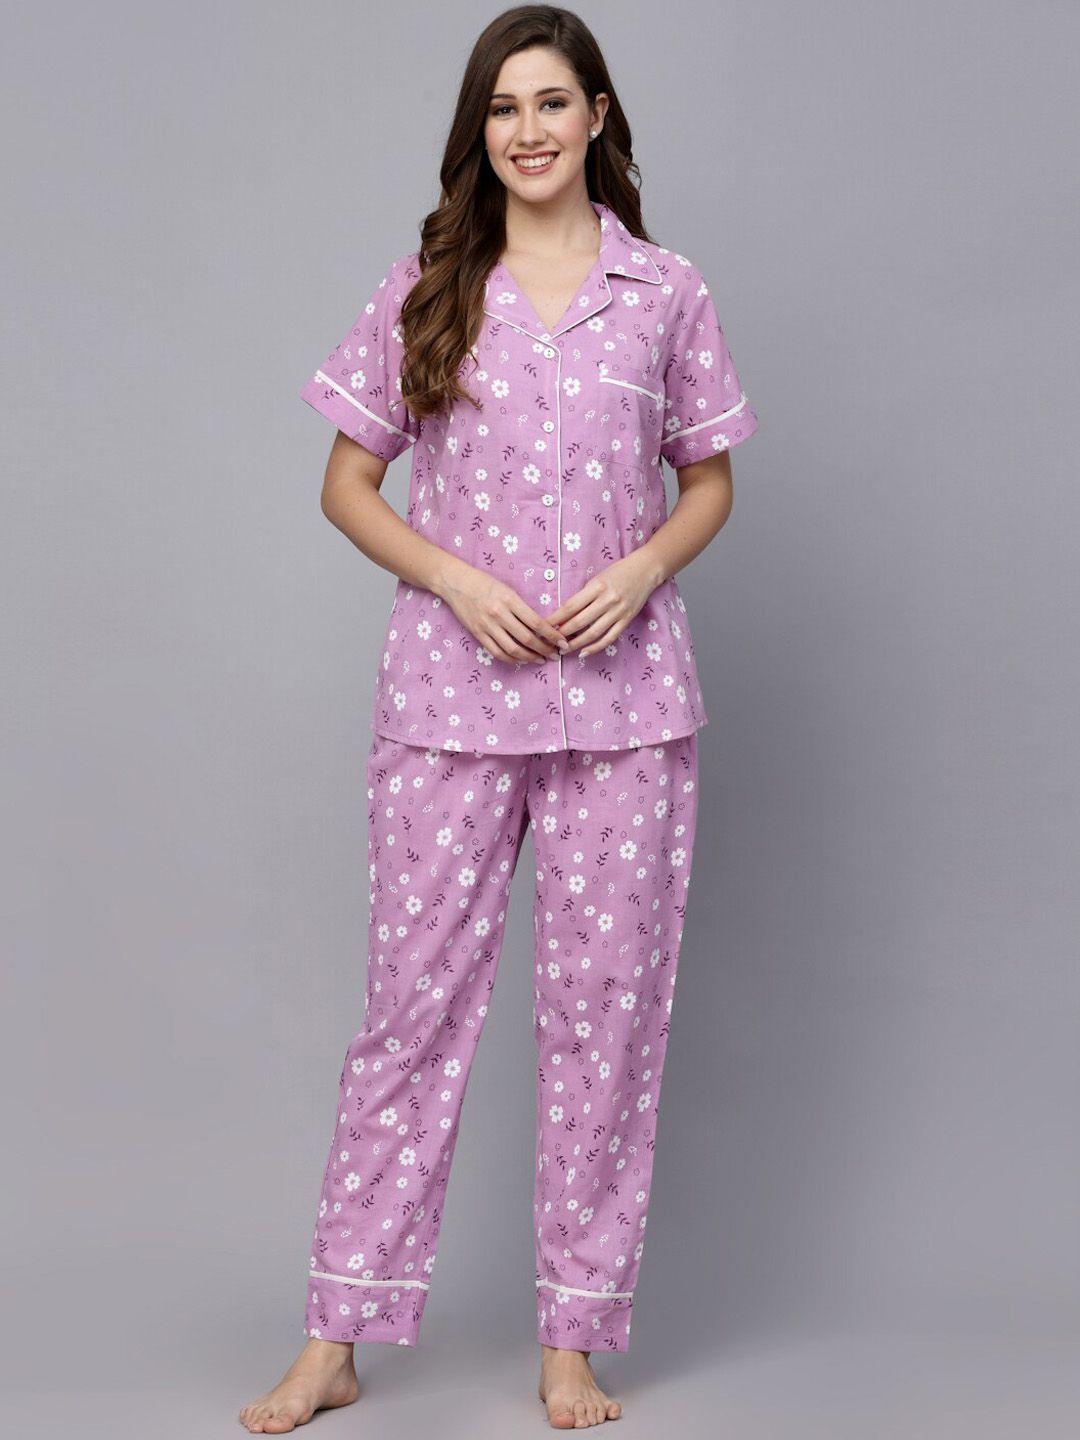 stylum lavender & white floral printed pure cotton night suit